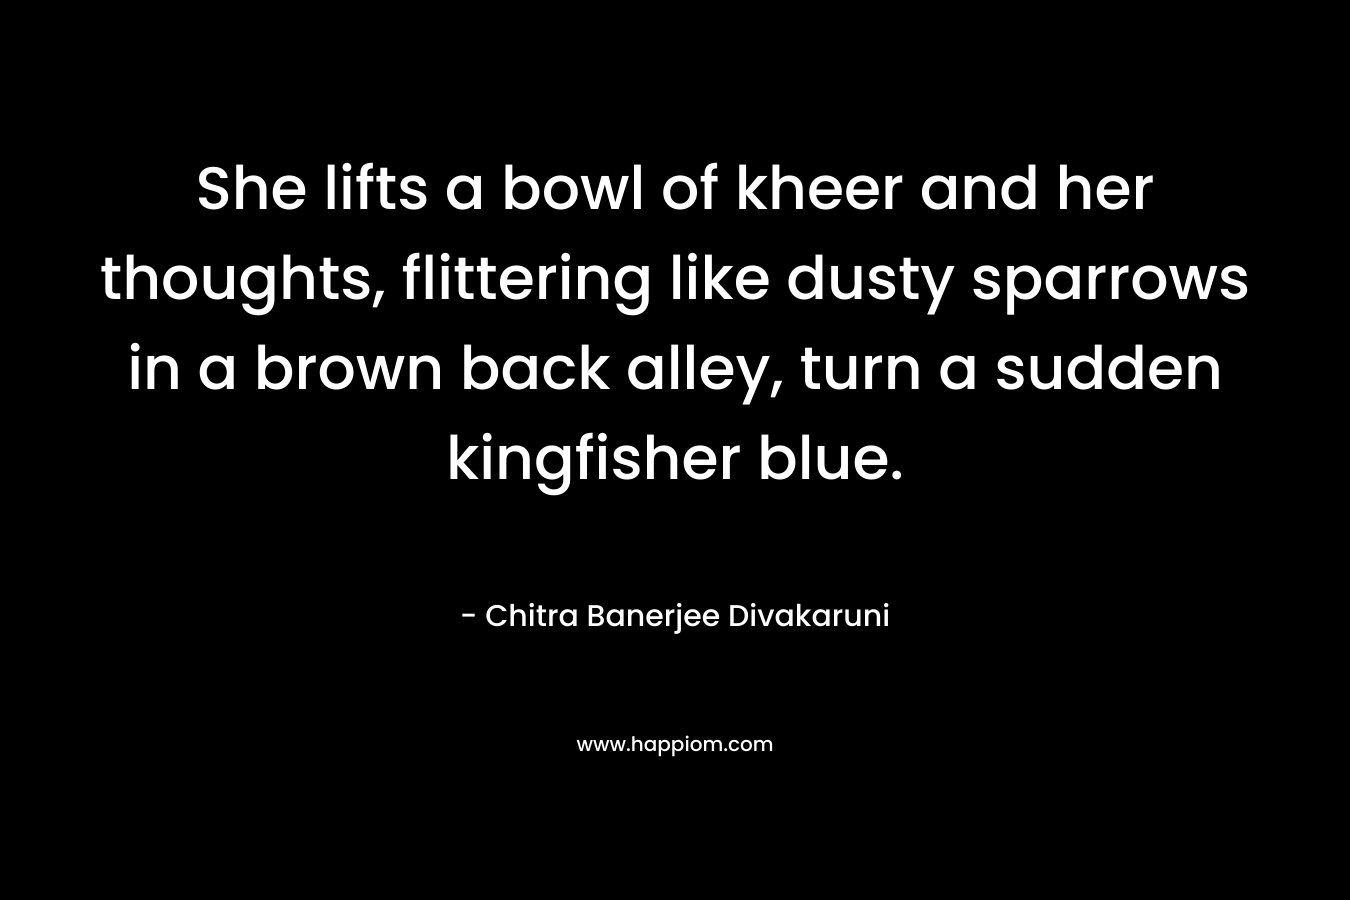 She lifts a bowl of kheer and her thoughts, flittering like dusty sparrows in a brown back alley, turn a sudden kingfisher blue. – Chitra Banerjee Divakaruni